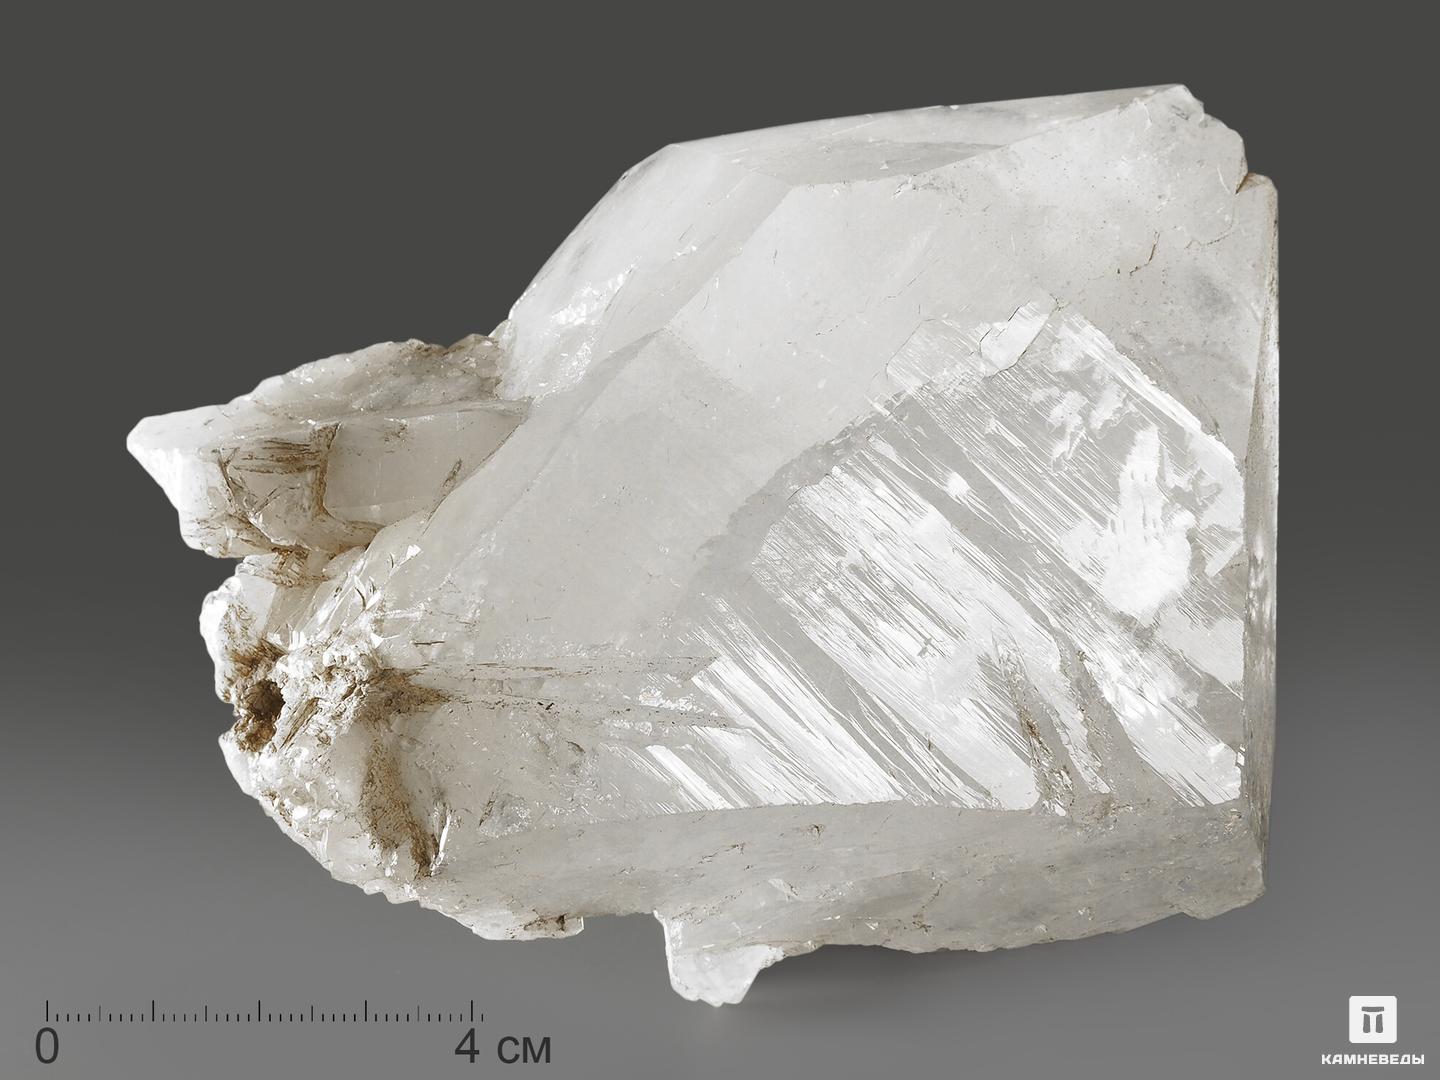 Crystal 12. Кристалл 12. C12 Кристалл.